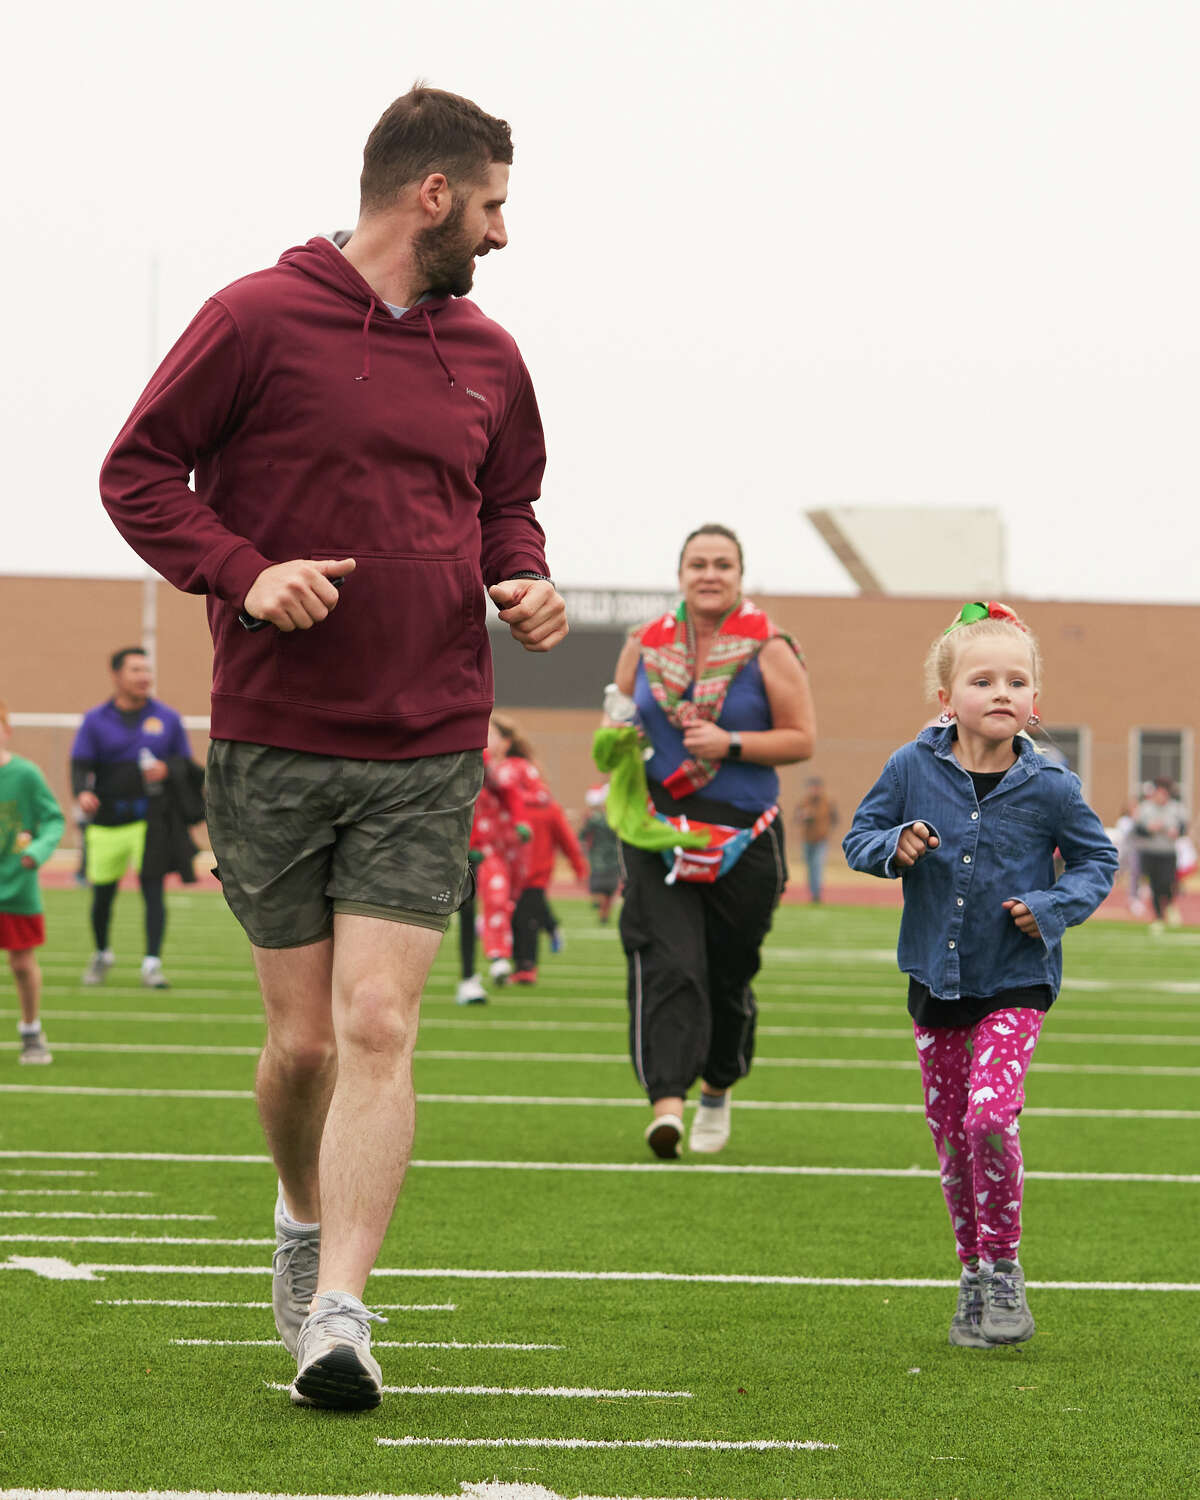 The second annual Jingle Bell Jog, presented by the Midland ISD Physical Education Department, at Memorial Stadium, on Saturday, Dec. 10, 2022. TREVOR HAWES/MIDLAND ISD